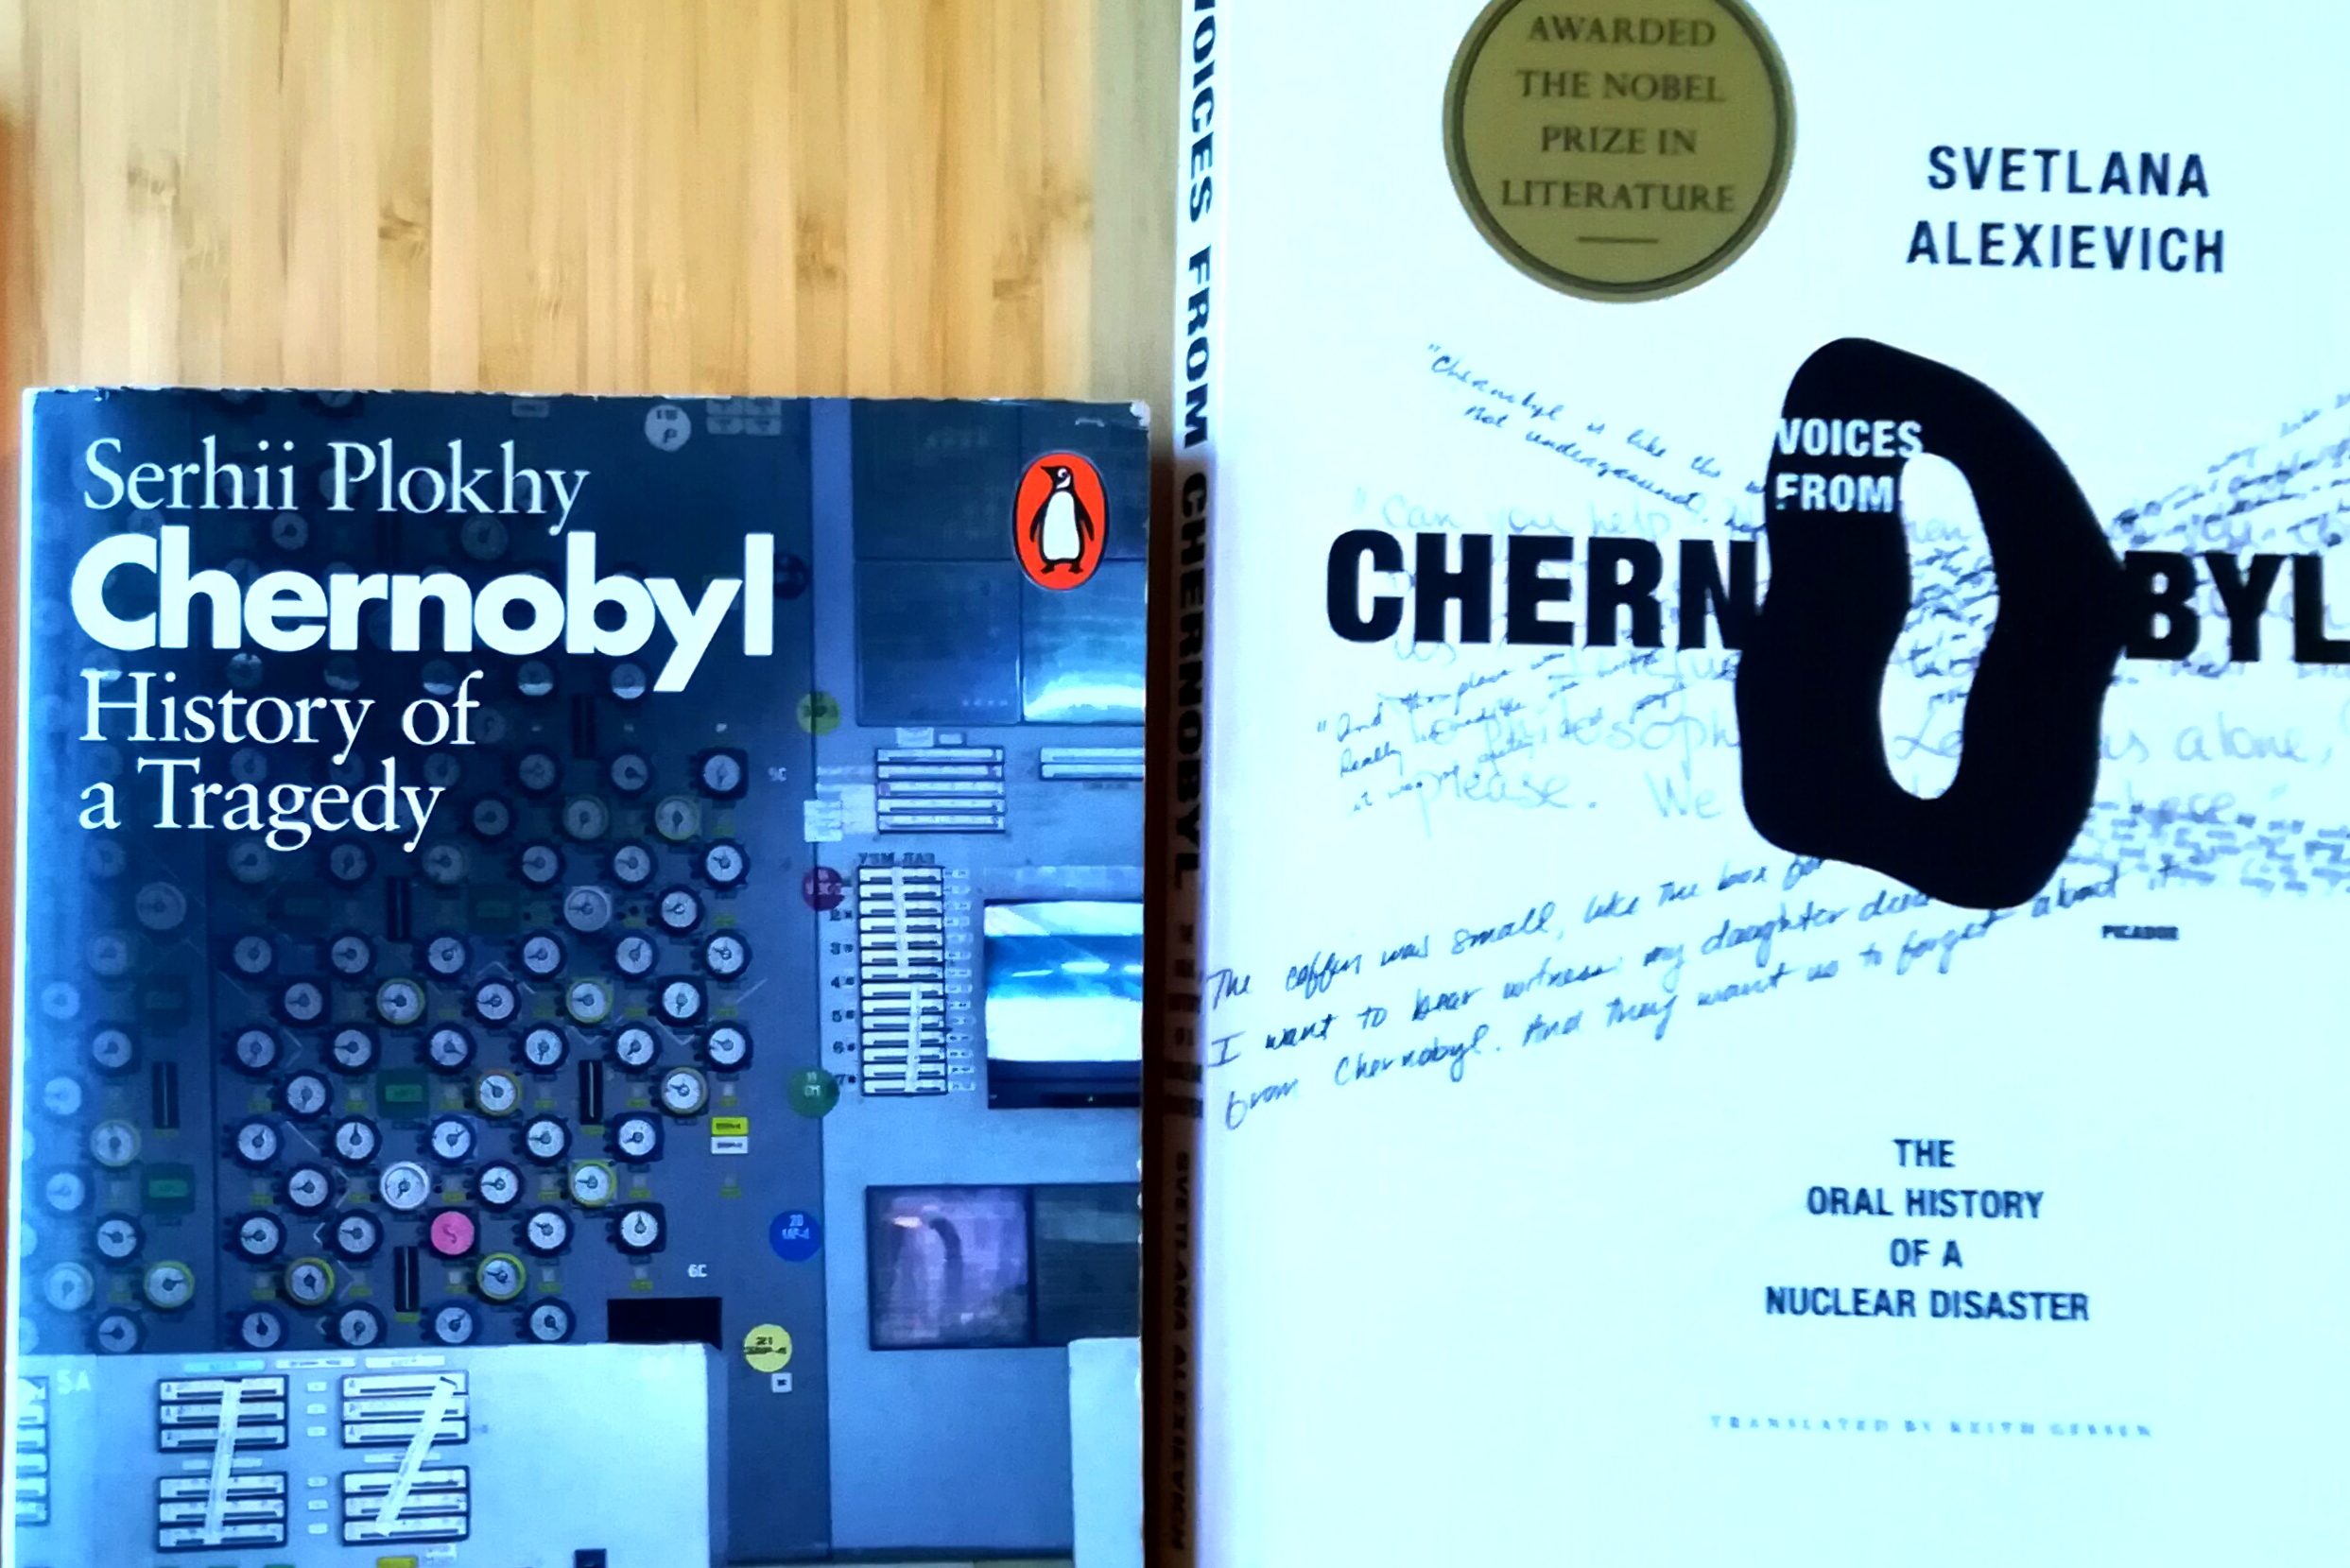 Two books about Chernobyl on a table, face up. 'Chernobyl: History of a Tragedy' by Serhii Plokhy and 'Voices from Chernobyl: the oral history of a nuclear disaster' by Svetlana Alexievich (a sticker on the cover reads 'awarded the Nobel prize in literature').